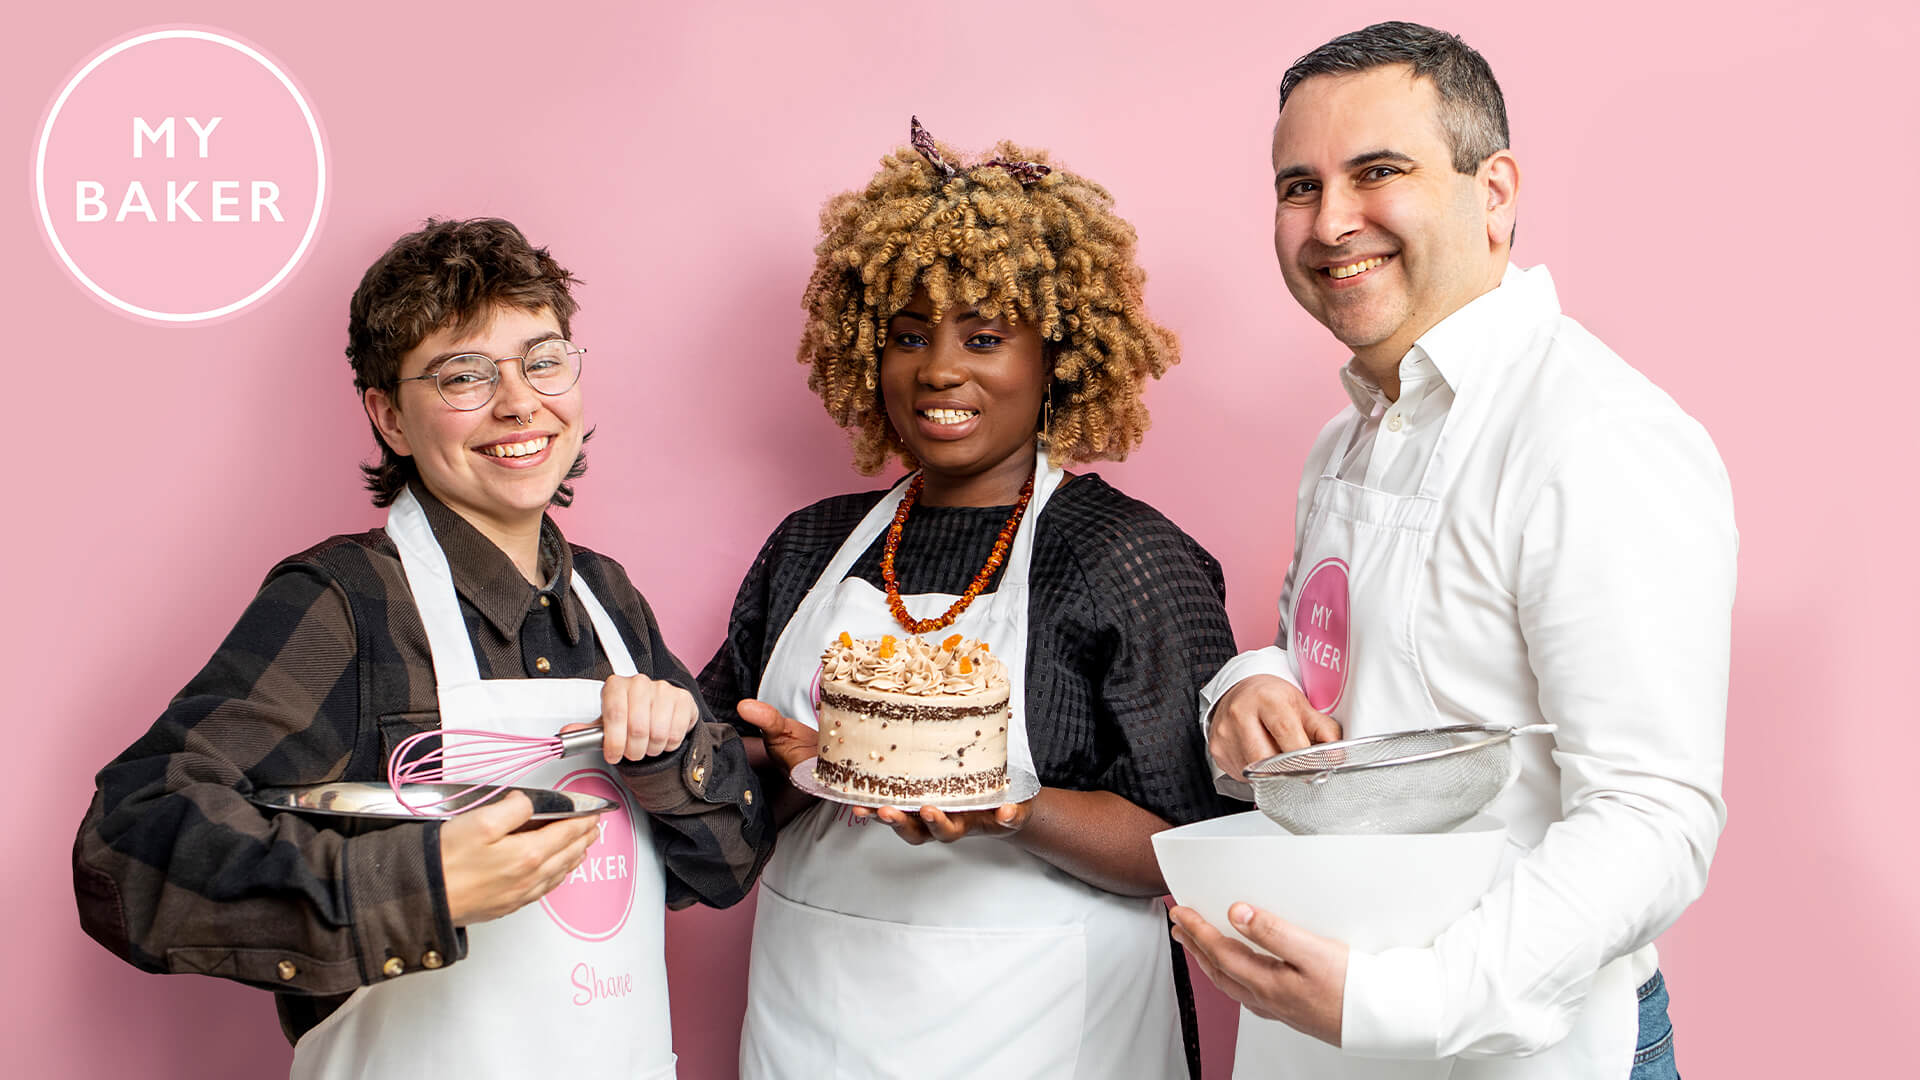 The My Baker team infront of a pink backdrop